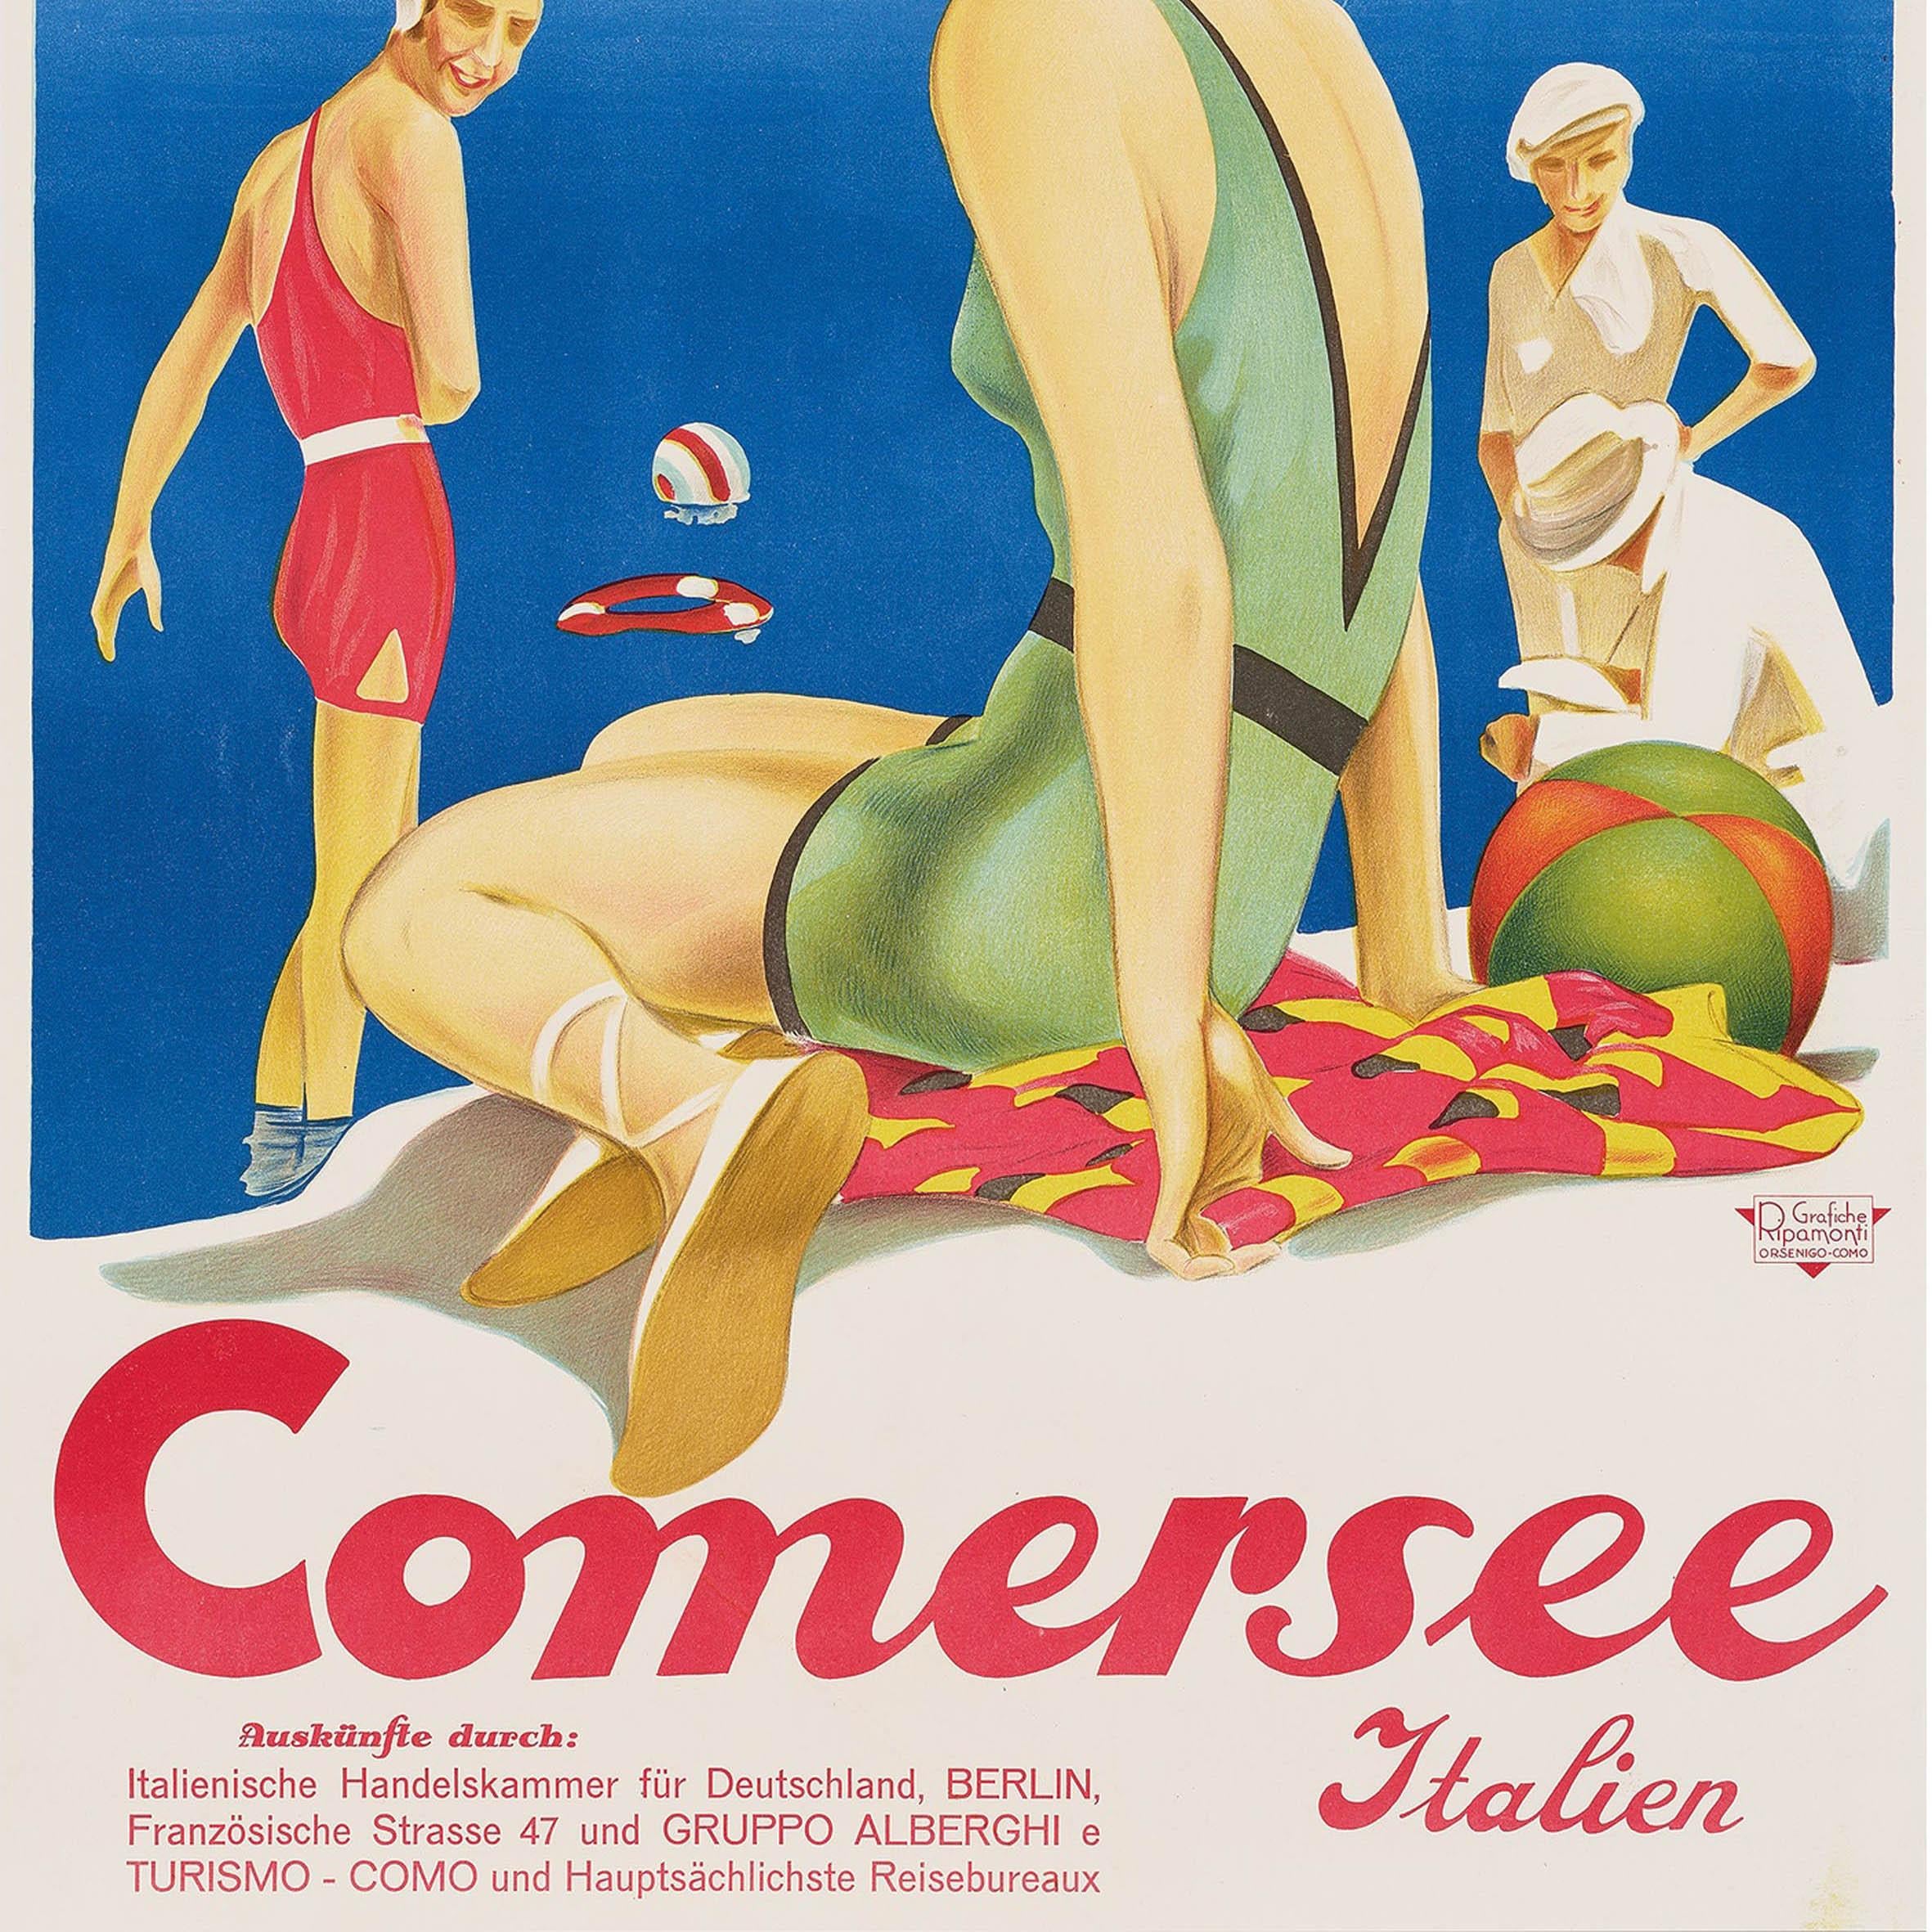 Original Vintage Travel Poster Lake Como Art Deco Bathers Comersee Italy Italien For Sale 1